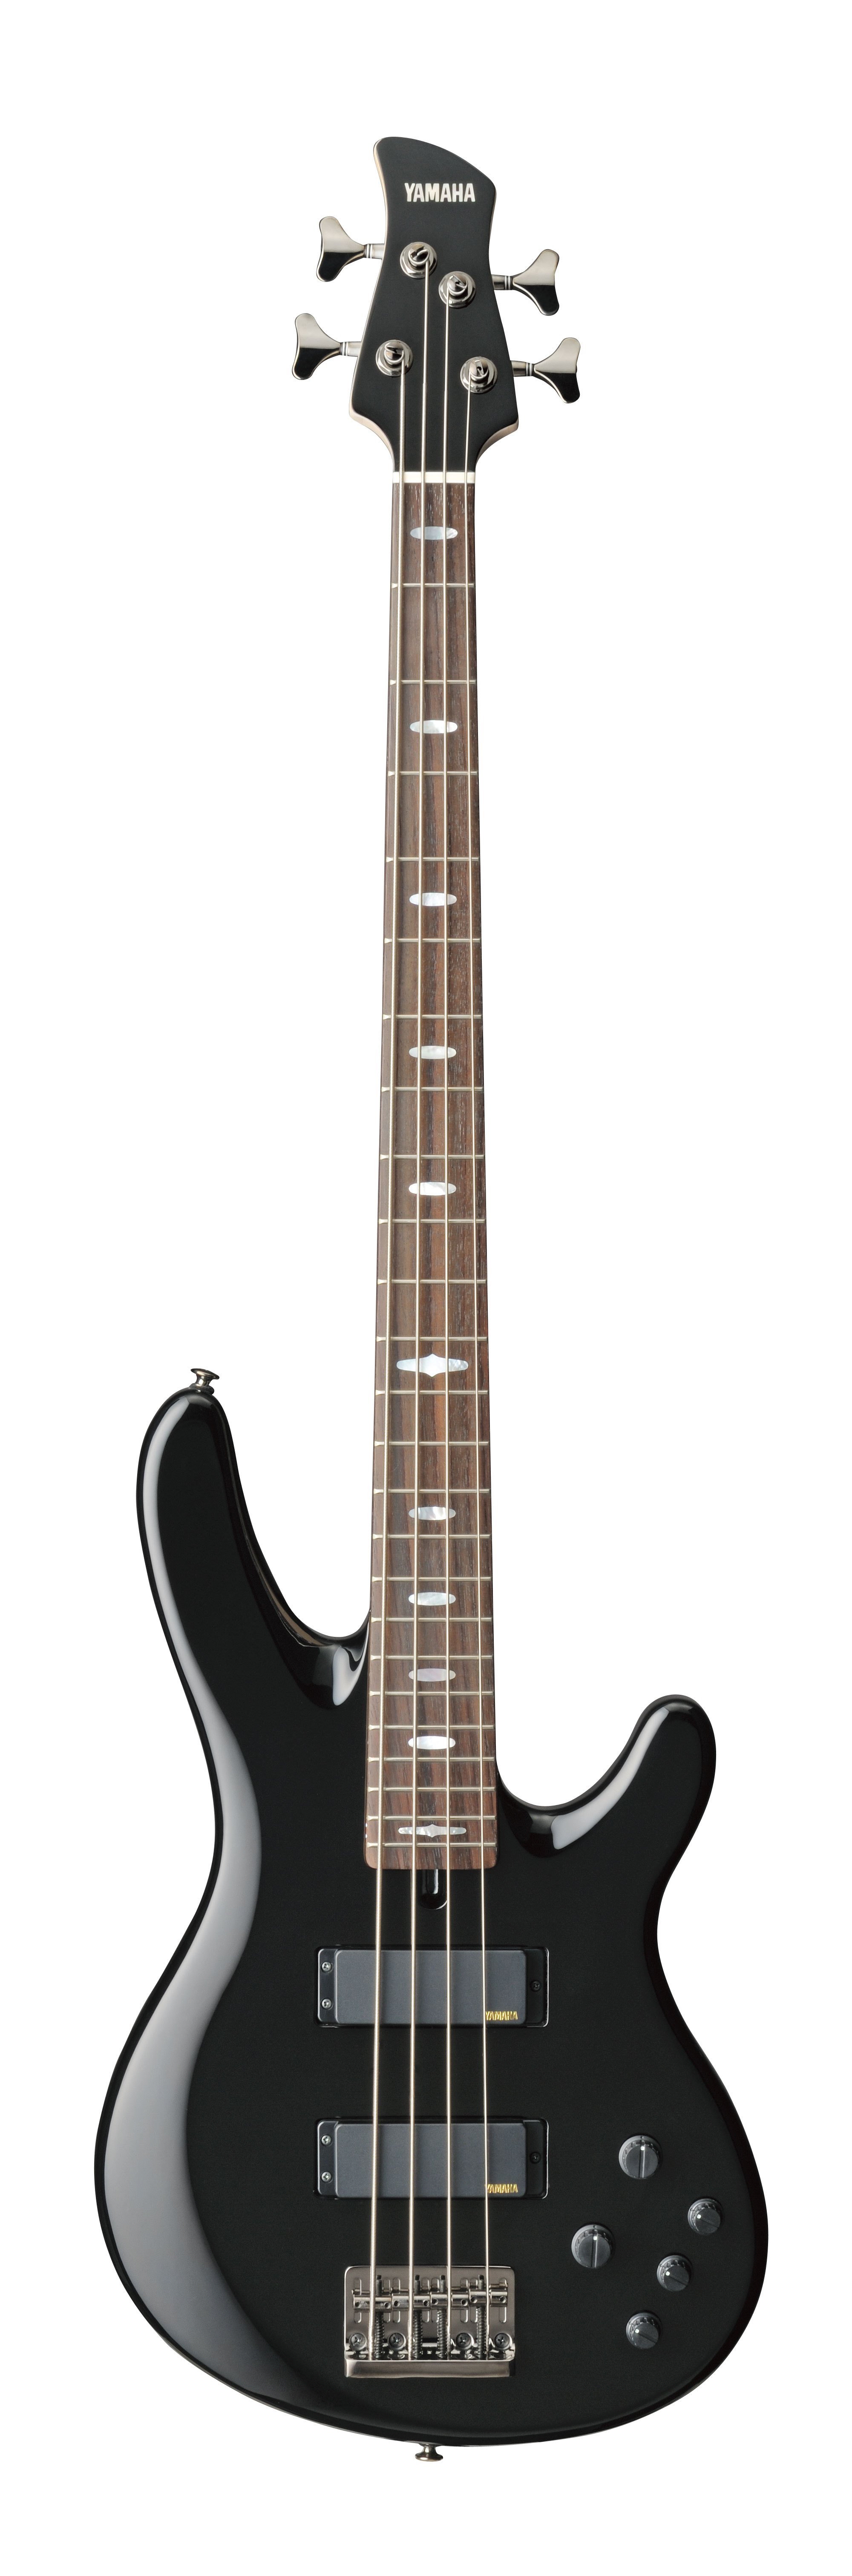 TRB - Overview - Electric Basses - Guitars, Basses, & Amps